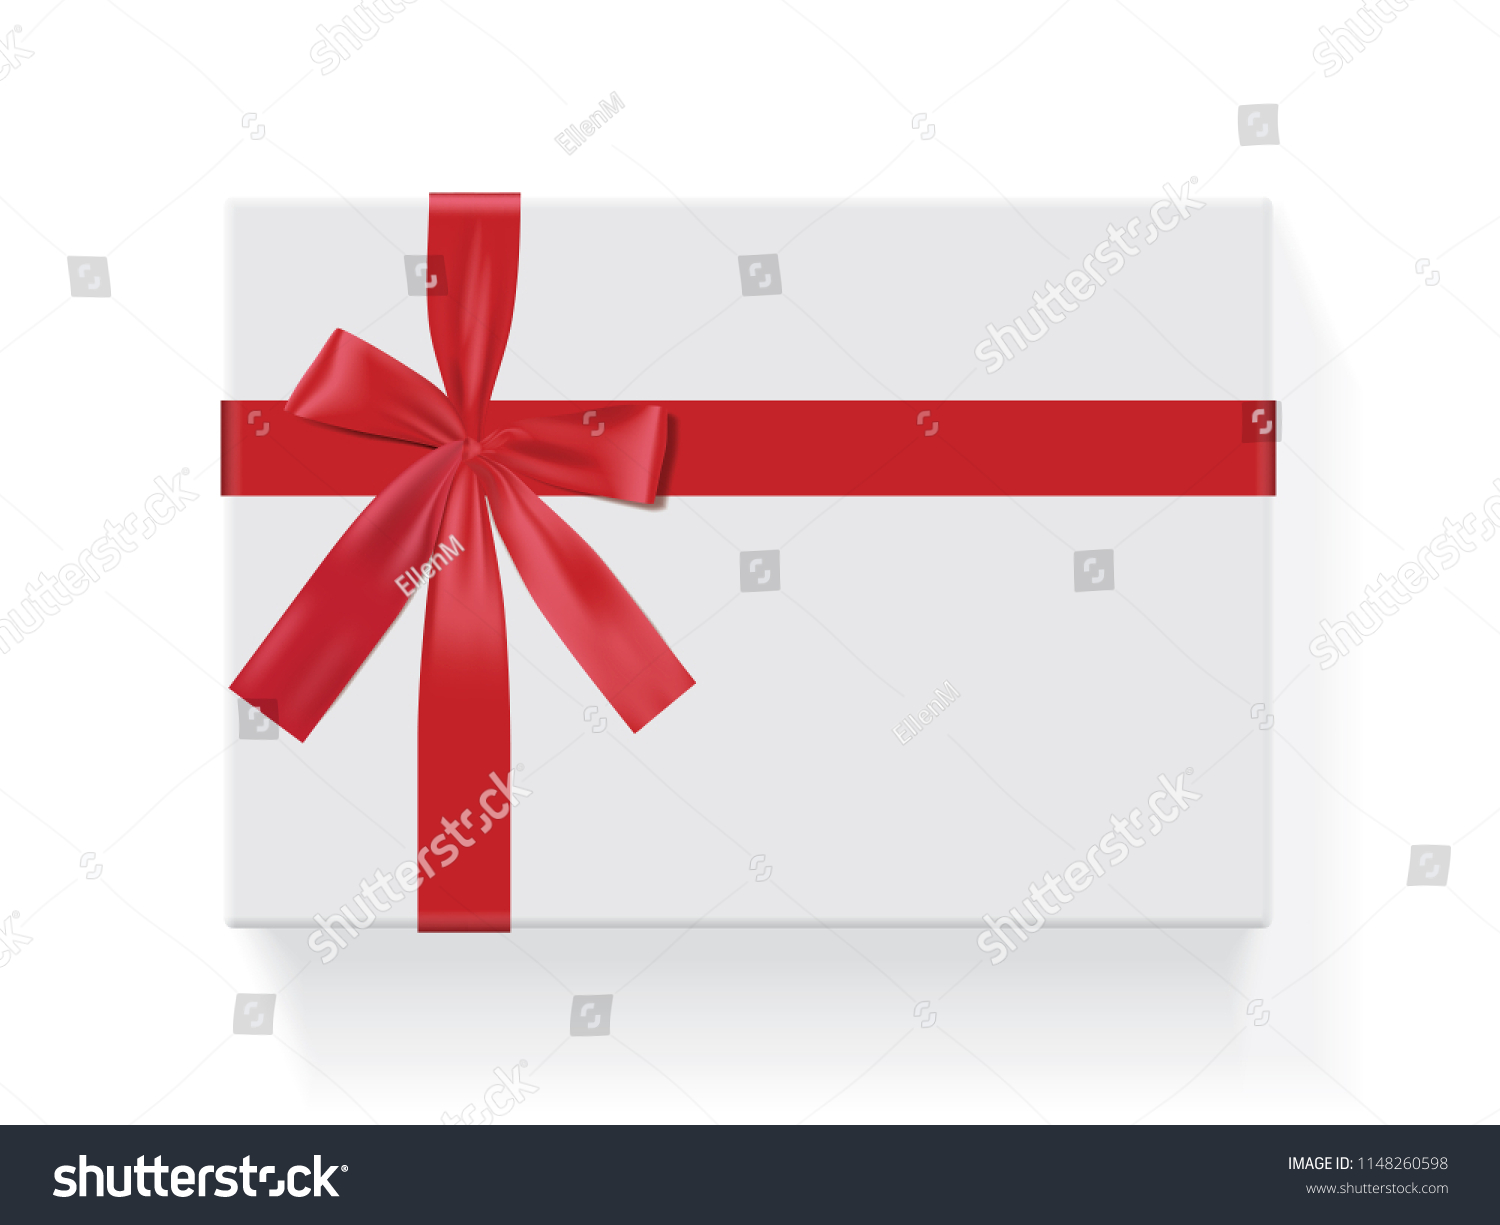 Rectangular White Box Red Bow Vector Stock Vector (Royalty Free ...